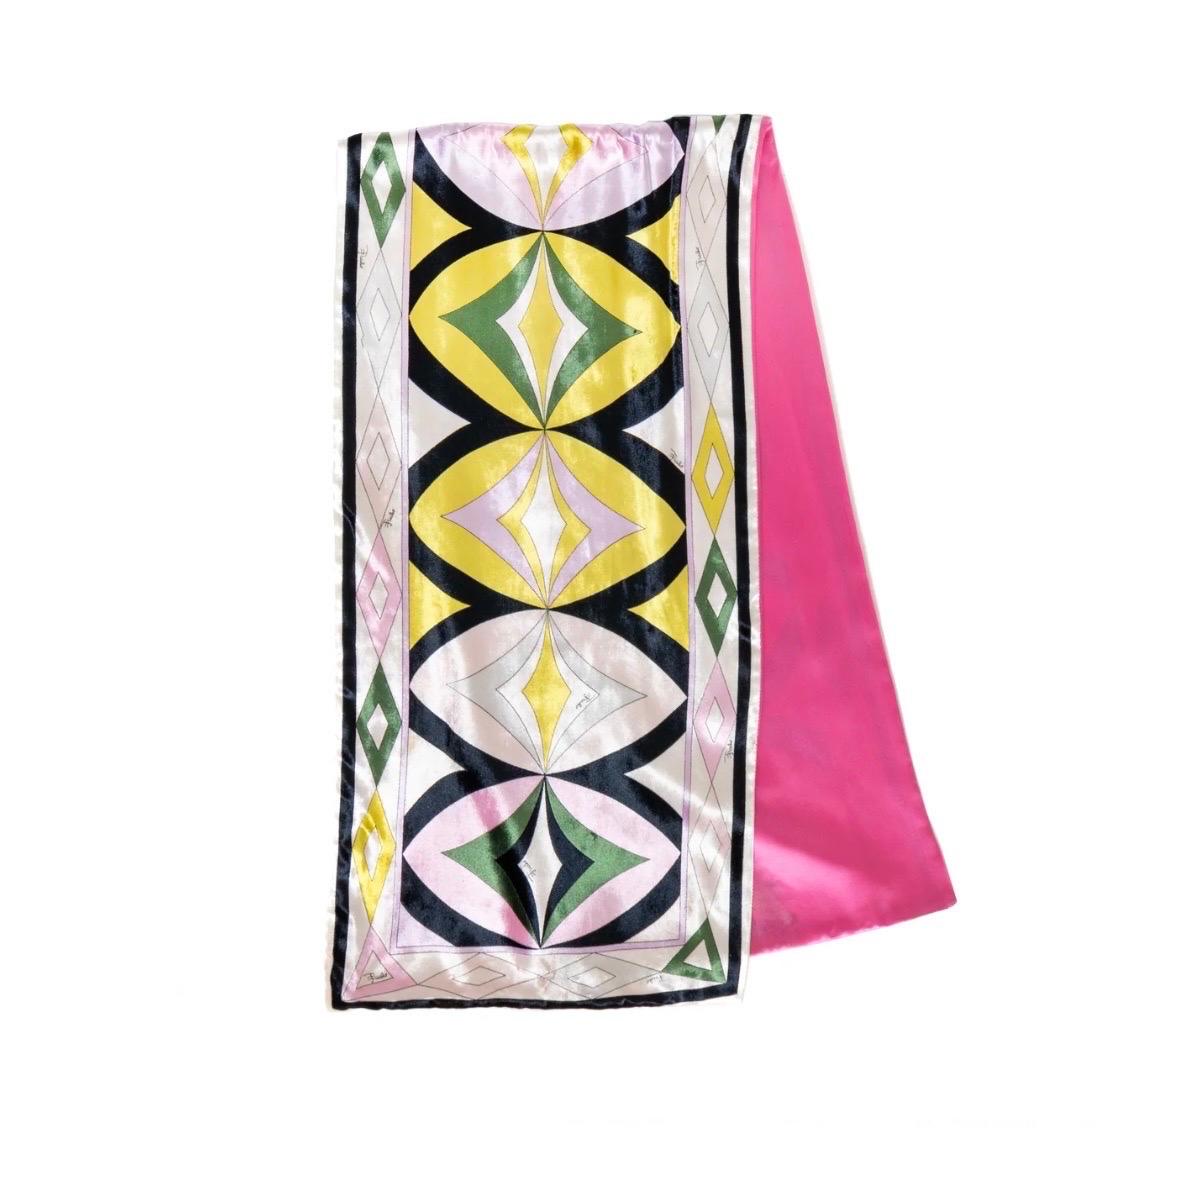 Multicolor rectangle scarf by Emilio Pucci
Rectangular opera style
Pink, green, yellow abstract pattern
Pink silky lining 
Fabric Composition: unknown; velour, lining feels like silk
Condition: good, visible signs of wear on corner and lining;